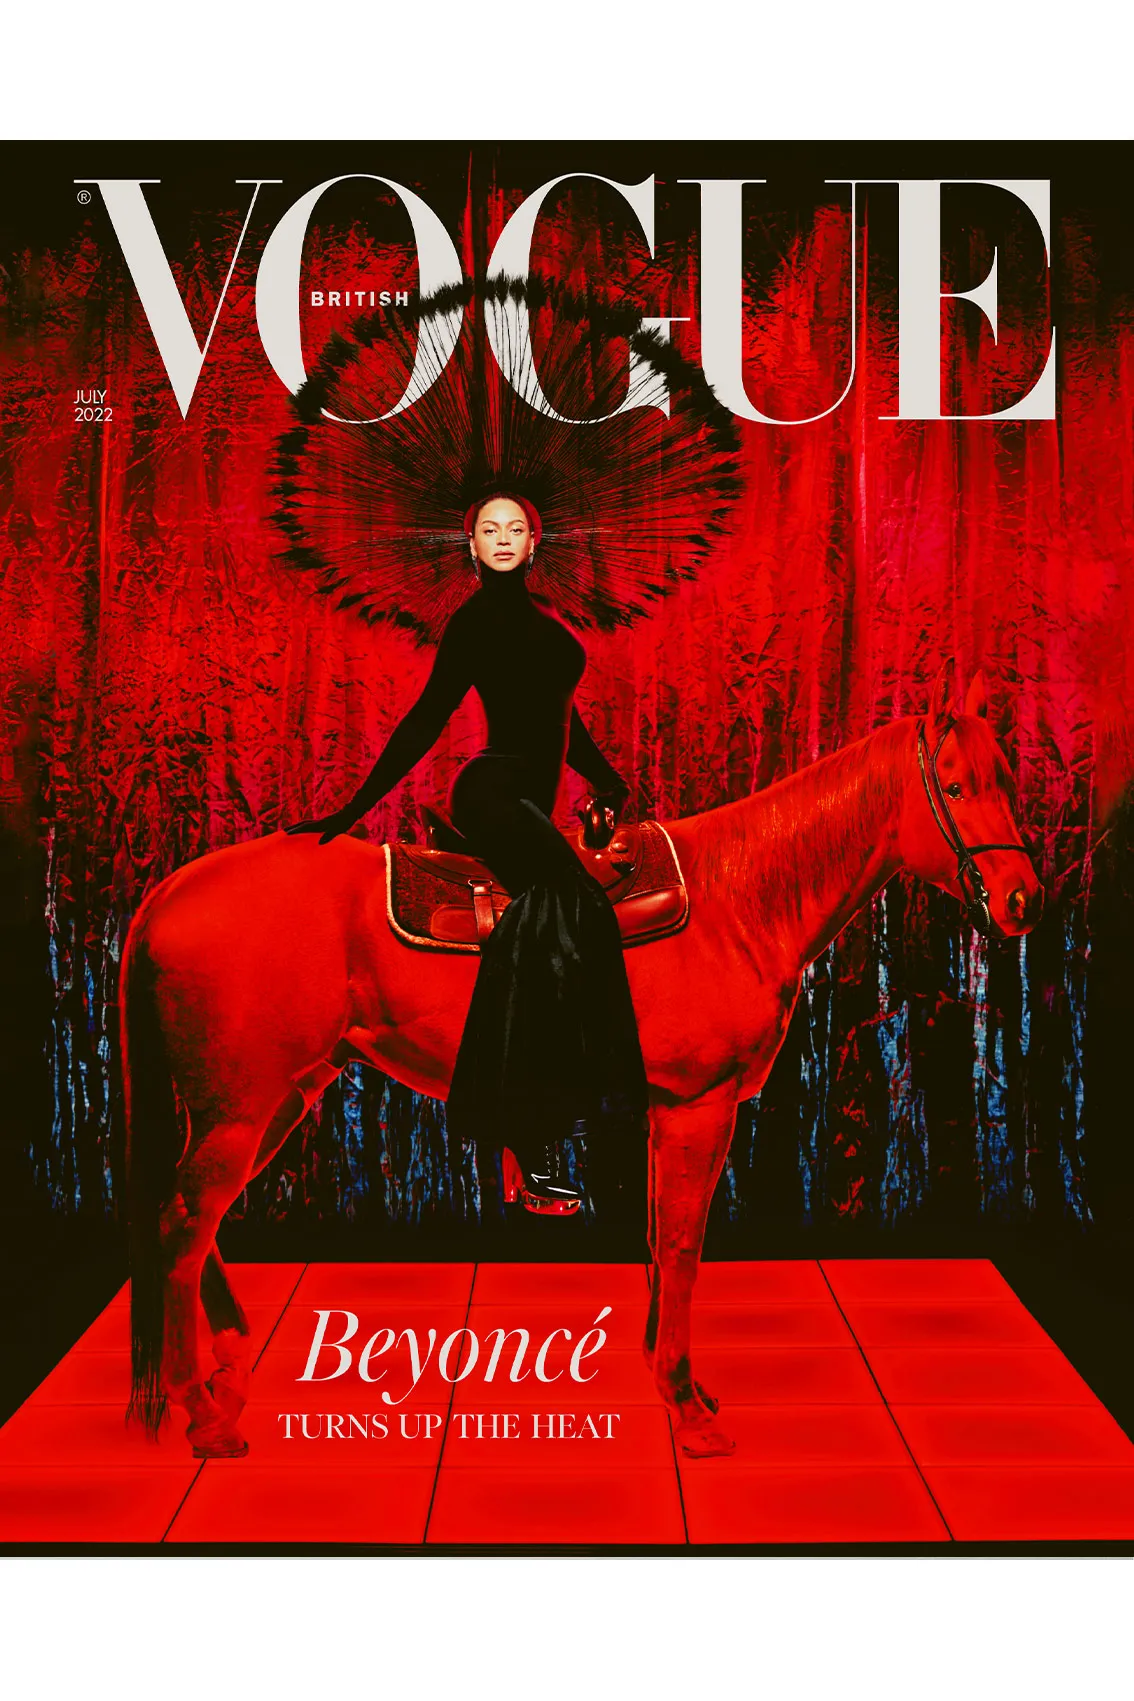 Beyonce British Vogue Cover + New Music Coming